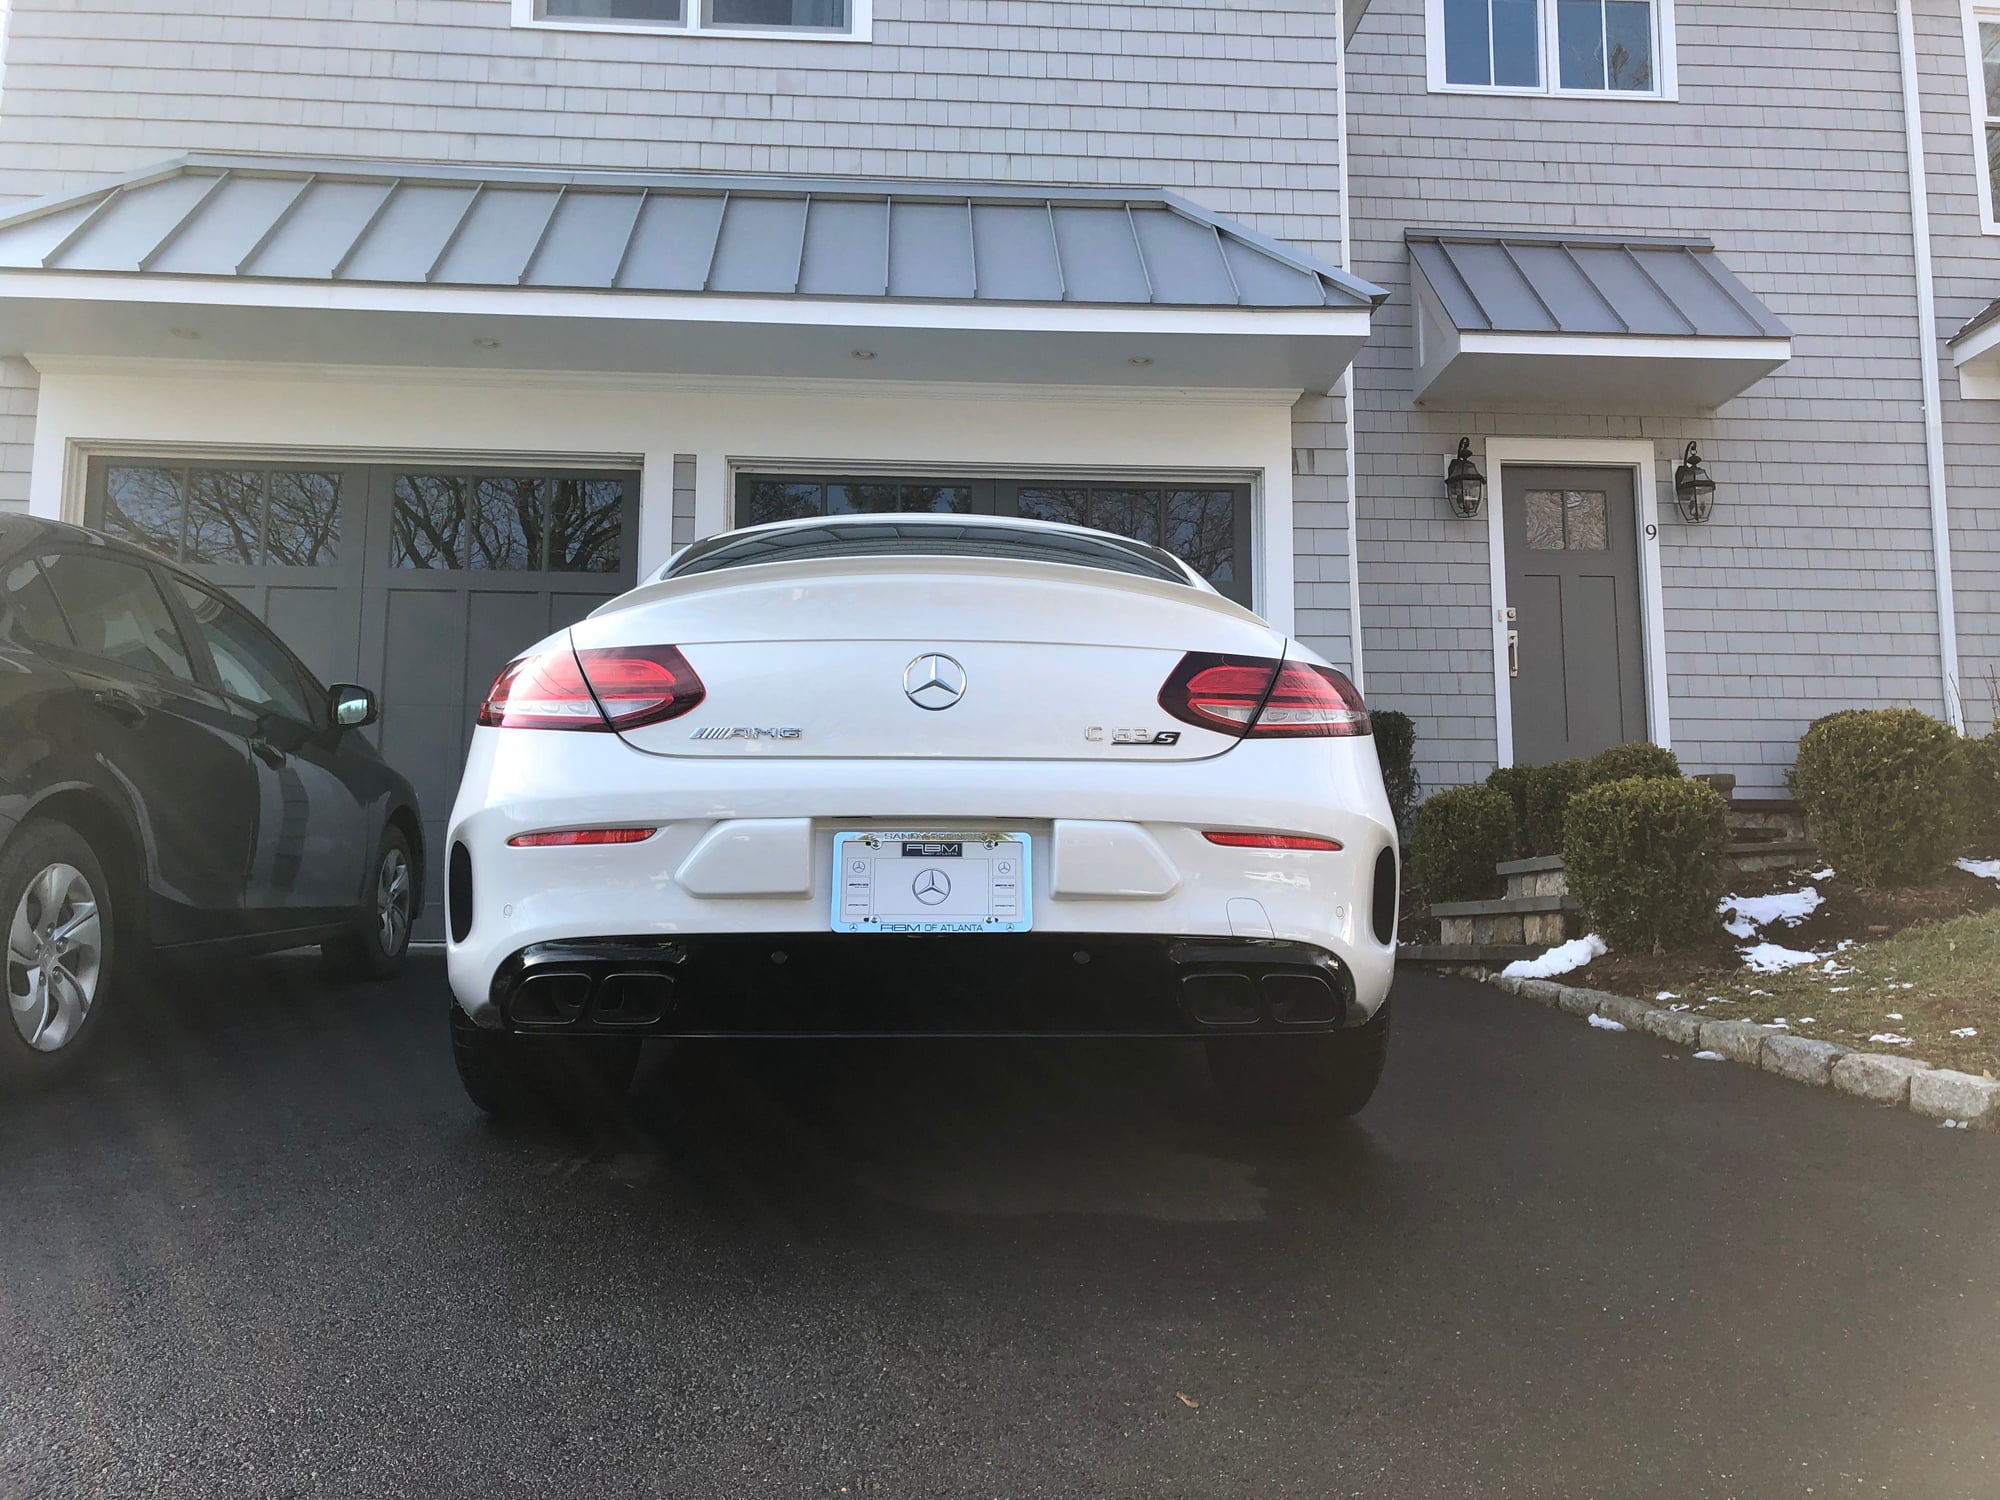 2018 Mercedes-Benz C63 AMG S - 2019 C63S AMG Coupe - Used - VIN WDDWJ8HB3KF840078 - 800 Miles - 8 cyl - 2WD - Automatic - Coupe - White - Westport, CT 06880, United States